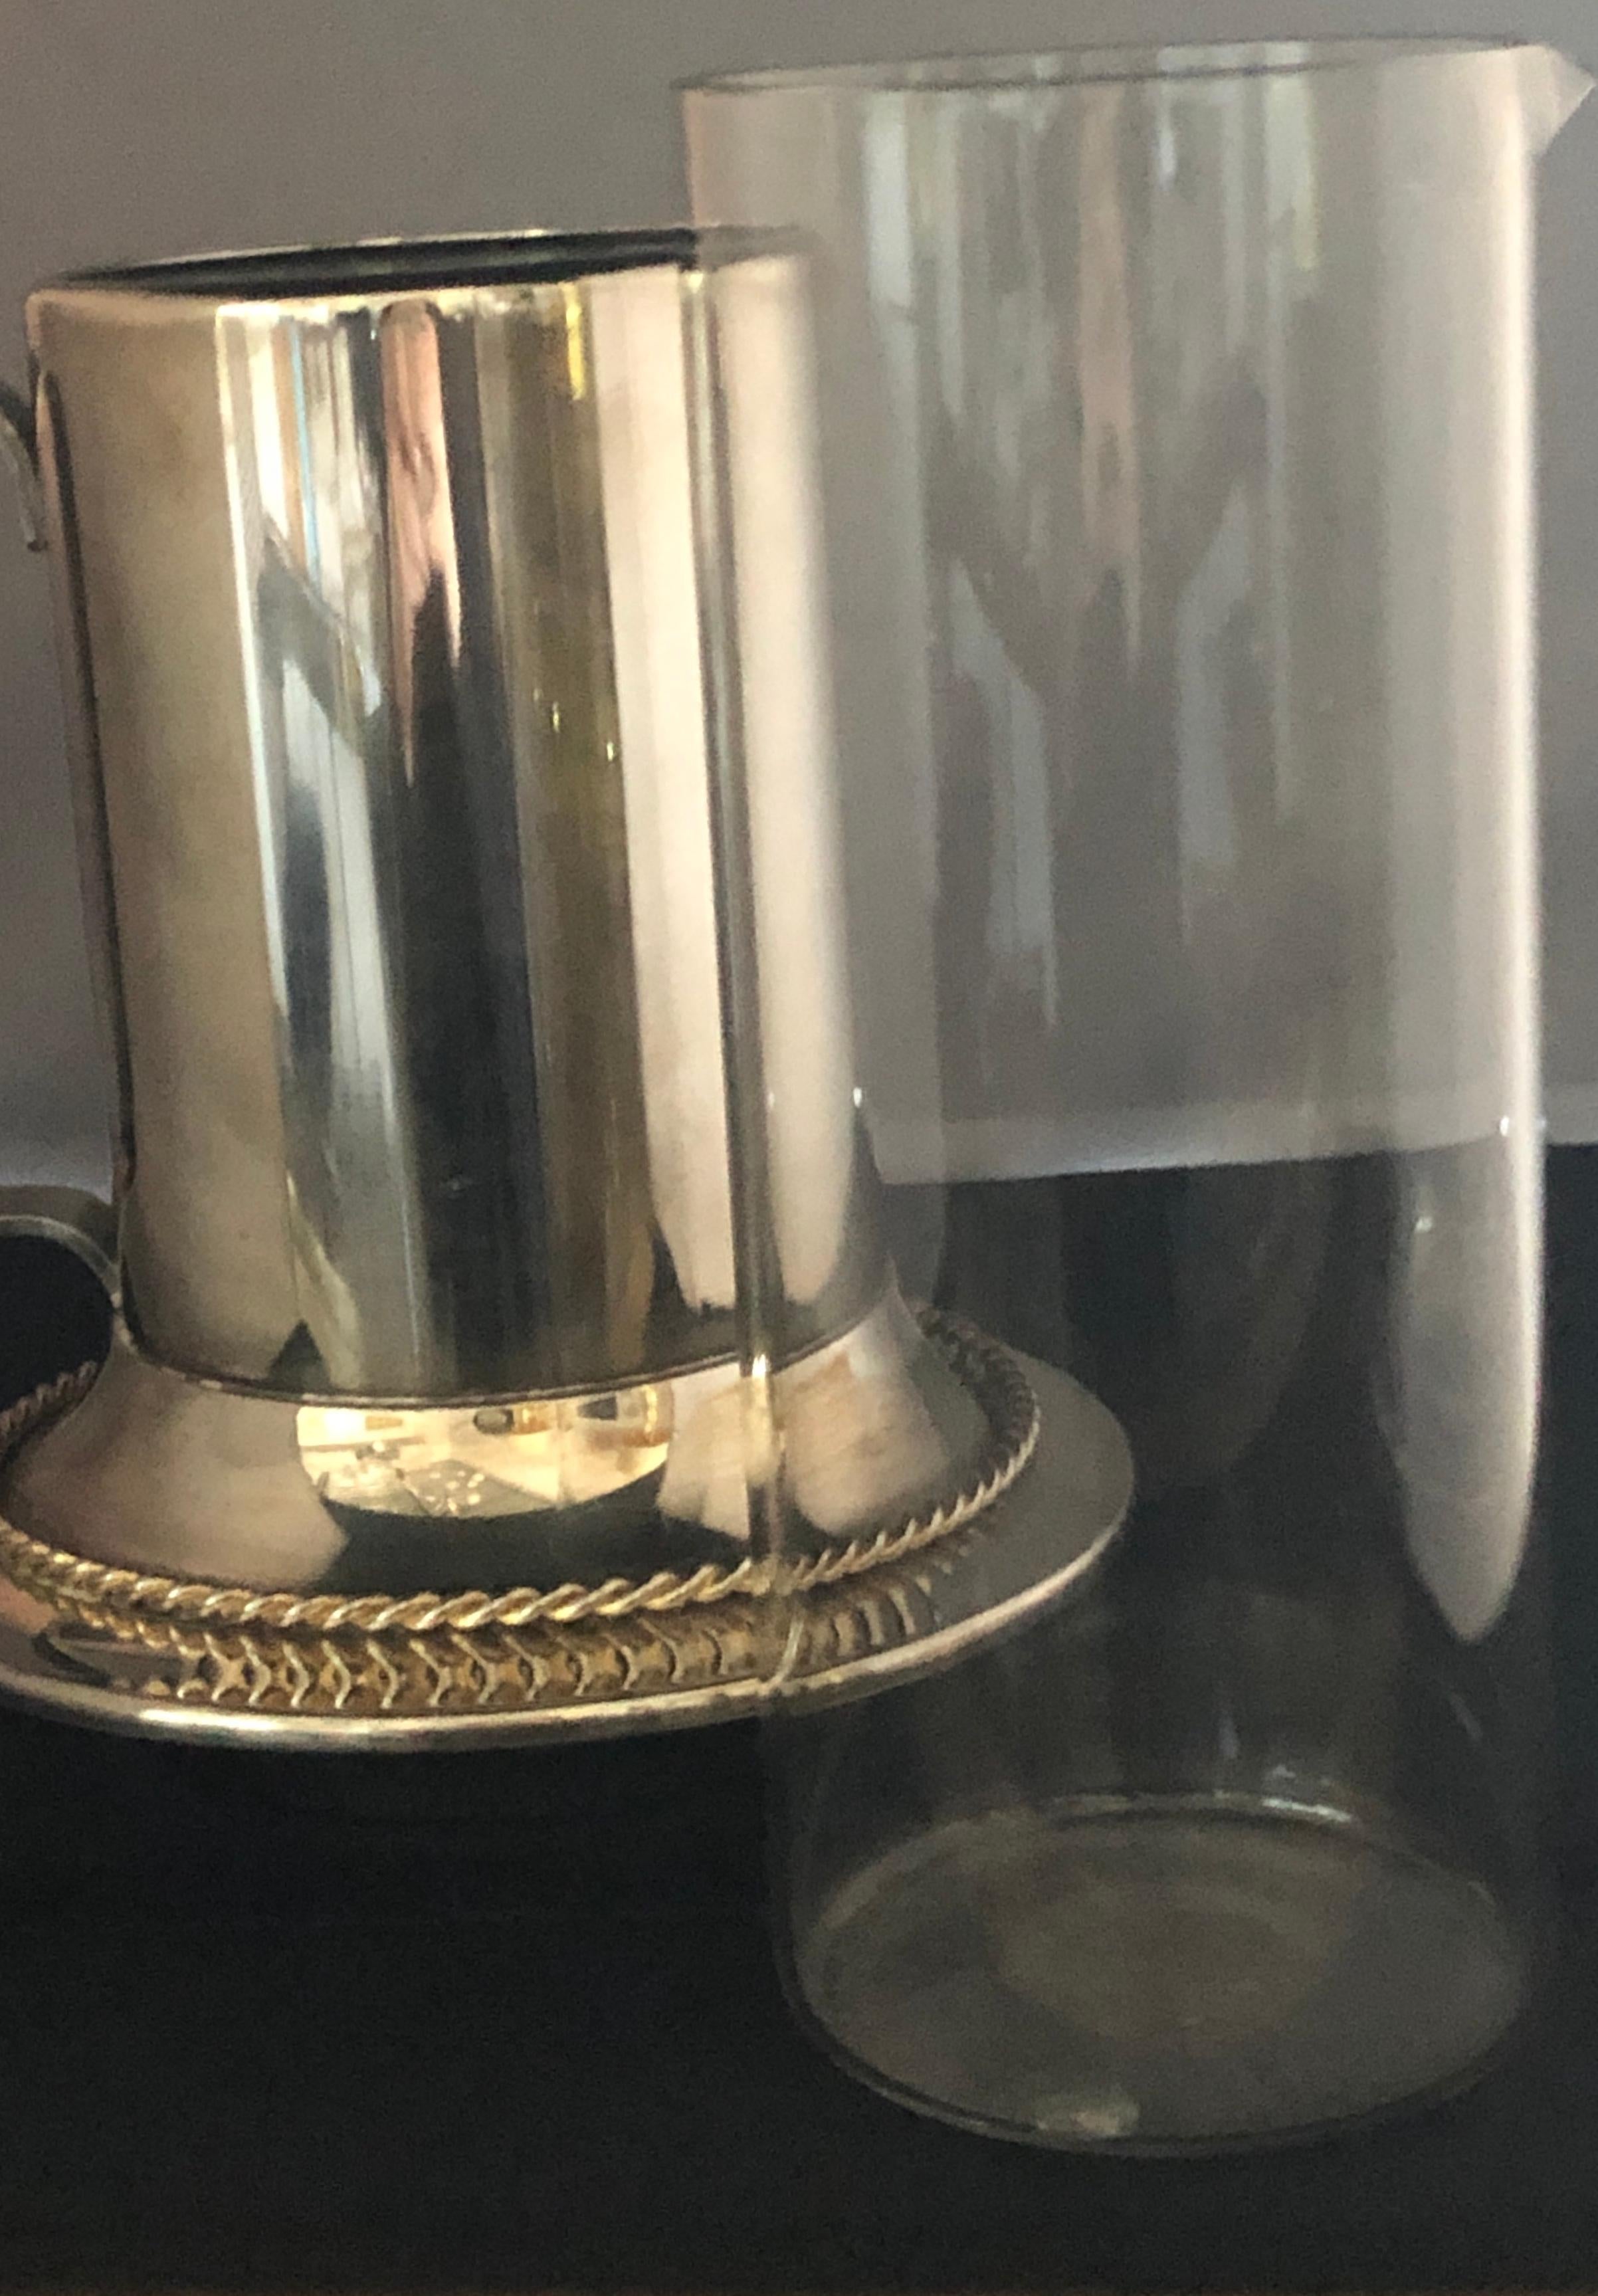 Gucci Glass Encased in Silver and Gold-Plate Nautical Martini Pitcher and Spoon In Good Condition For Sale In Houston, TX